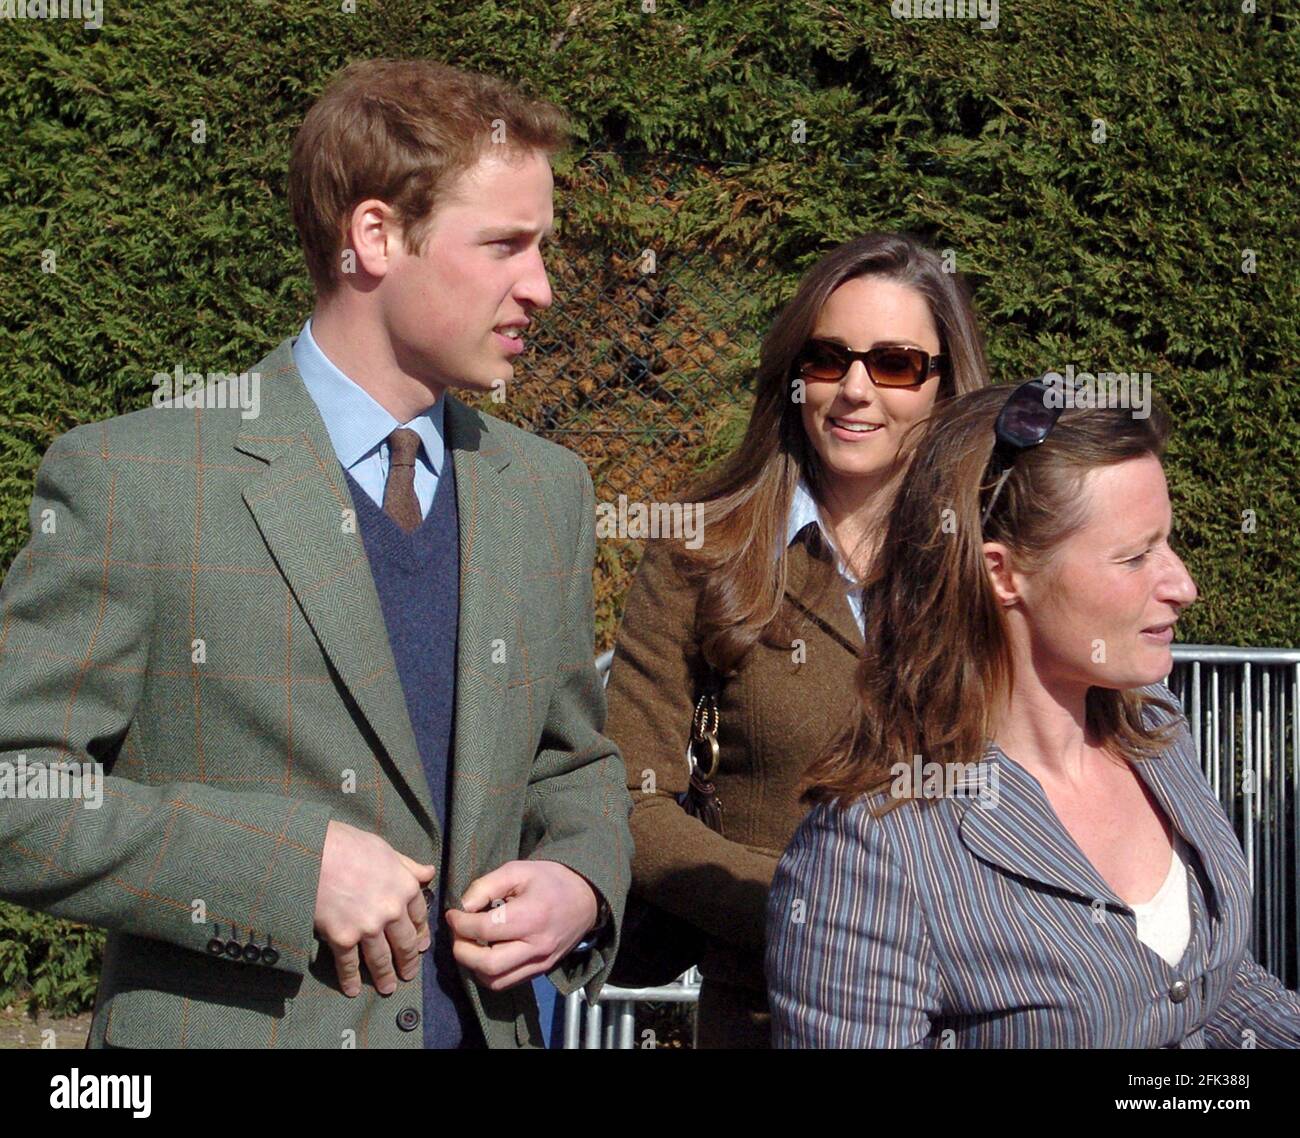 File photo dated 13/03/07 of the Duke and Duchess of Cambridge arriving for the first day of the Cheltenham Festival. University student Kate Middleton first caught the attention of 19-year-old Prince William when she strode down the catwalk in a sheer dress for a charity fashion show. Issue date: Wednesday April 28, 2021. Stock Photo